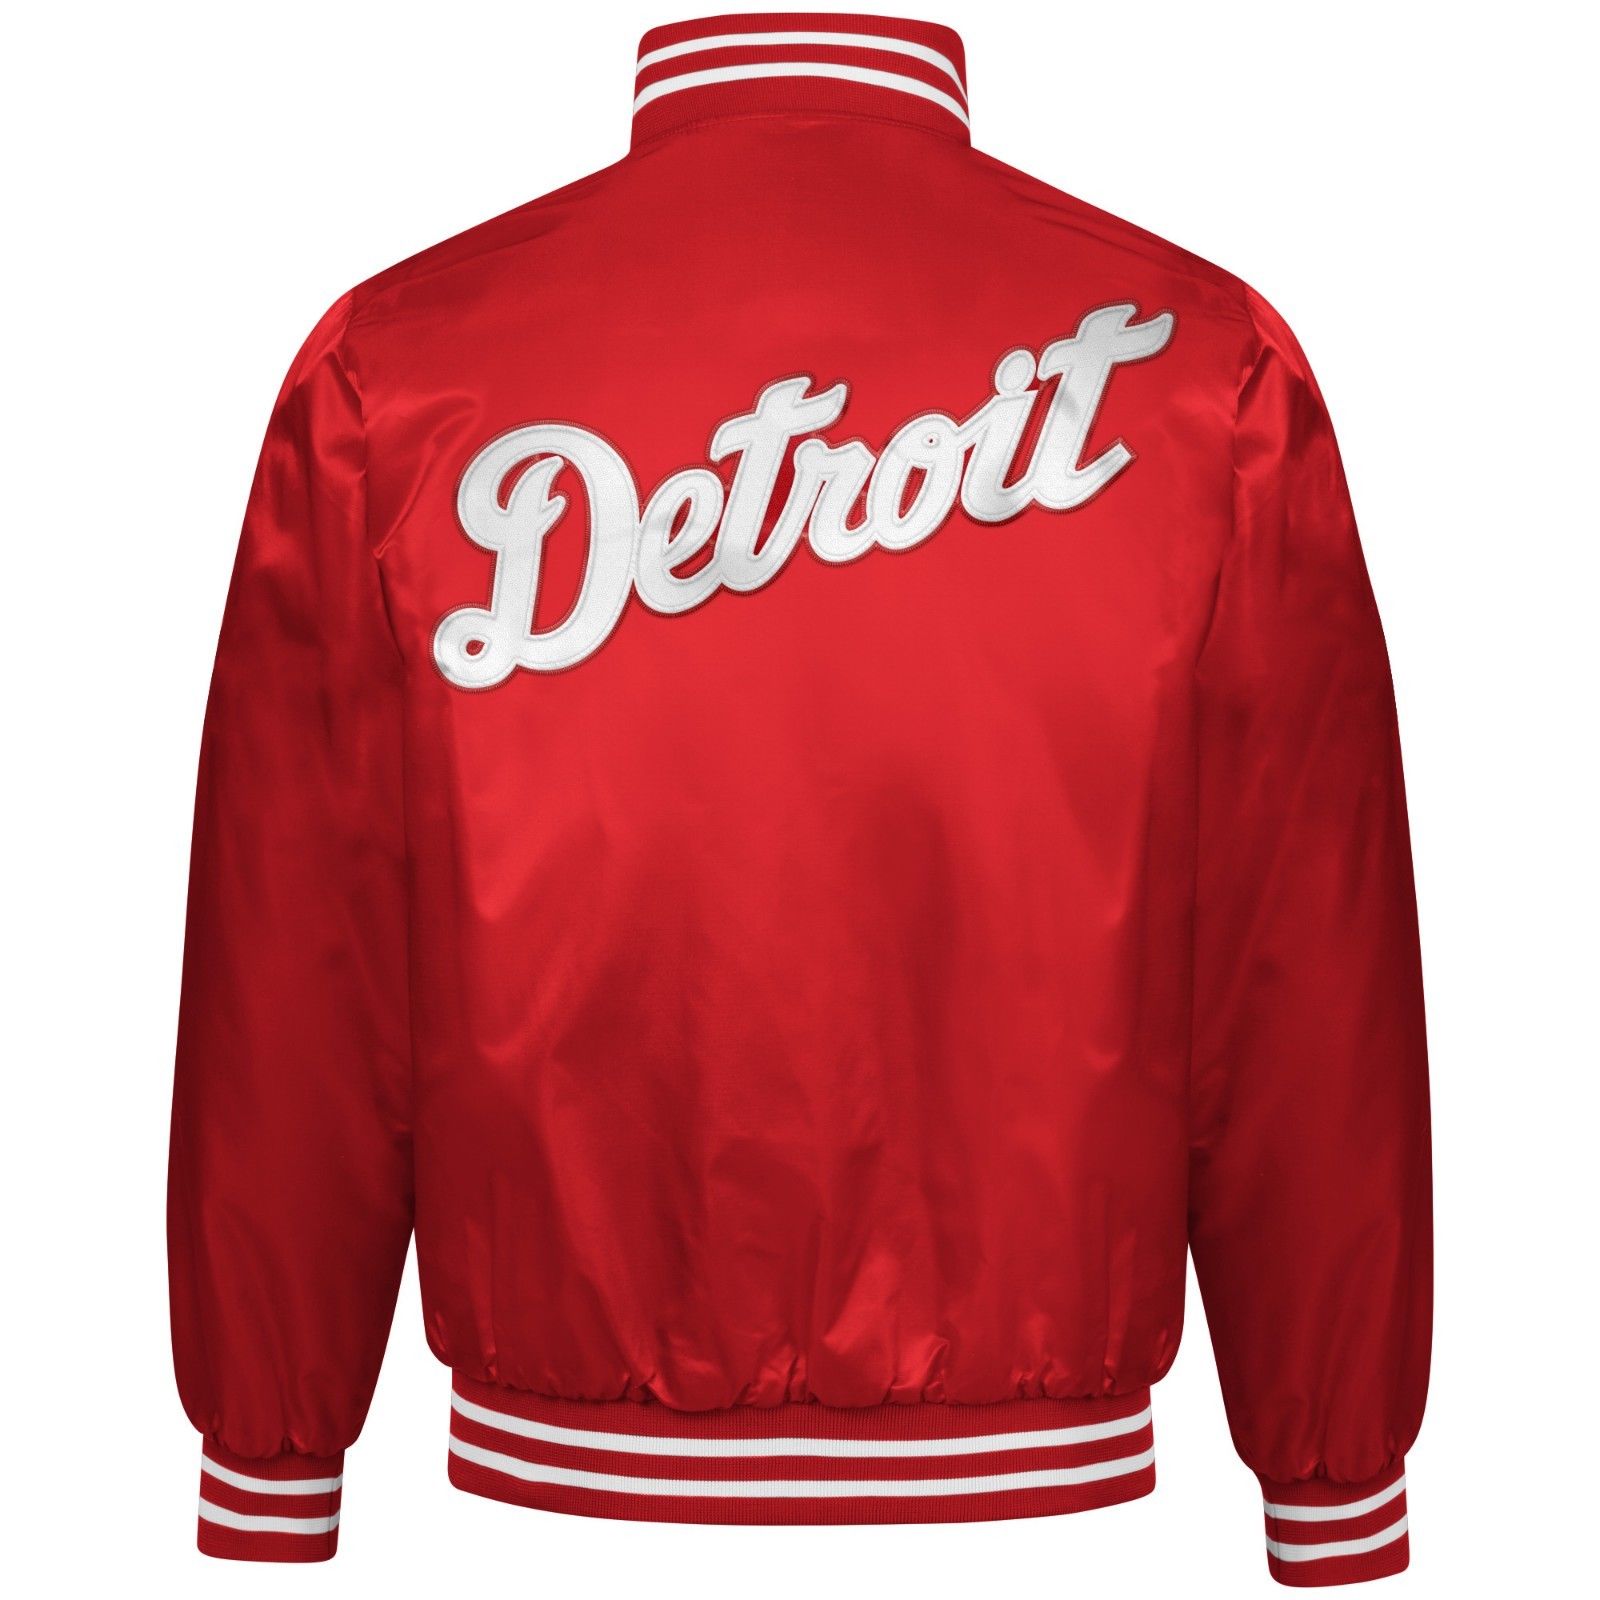 Exclusive: Authentic Starter Detroit Tigers MLB satin jacket - Red/White